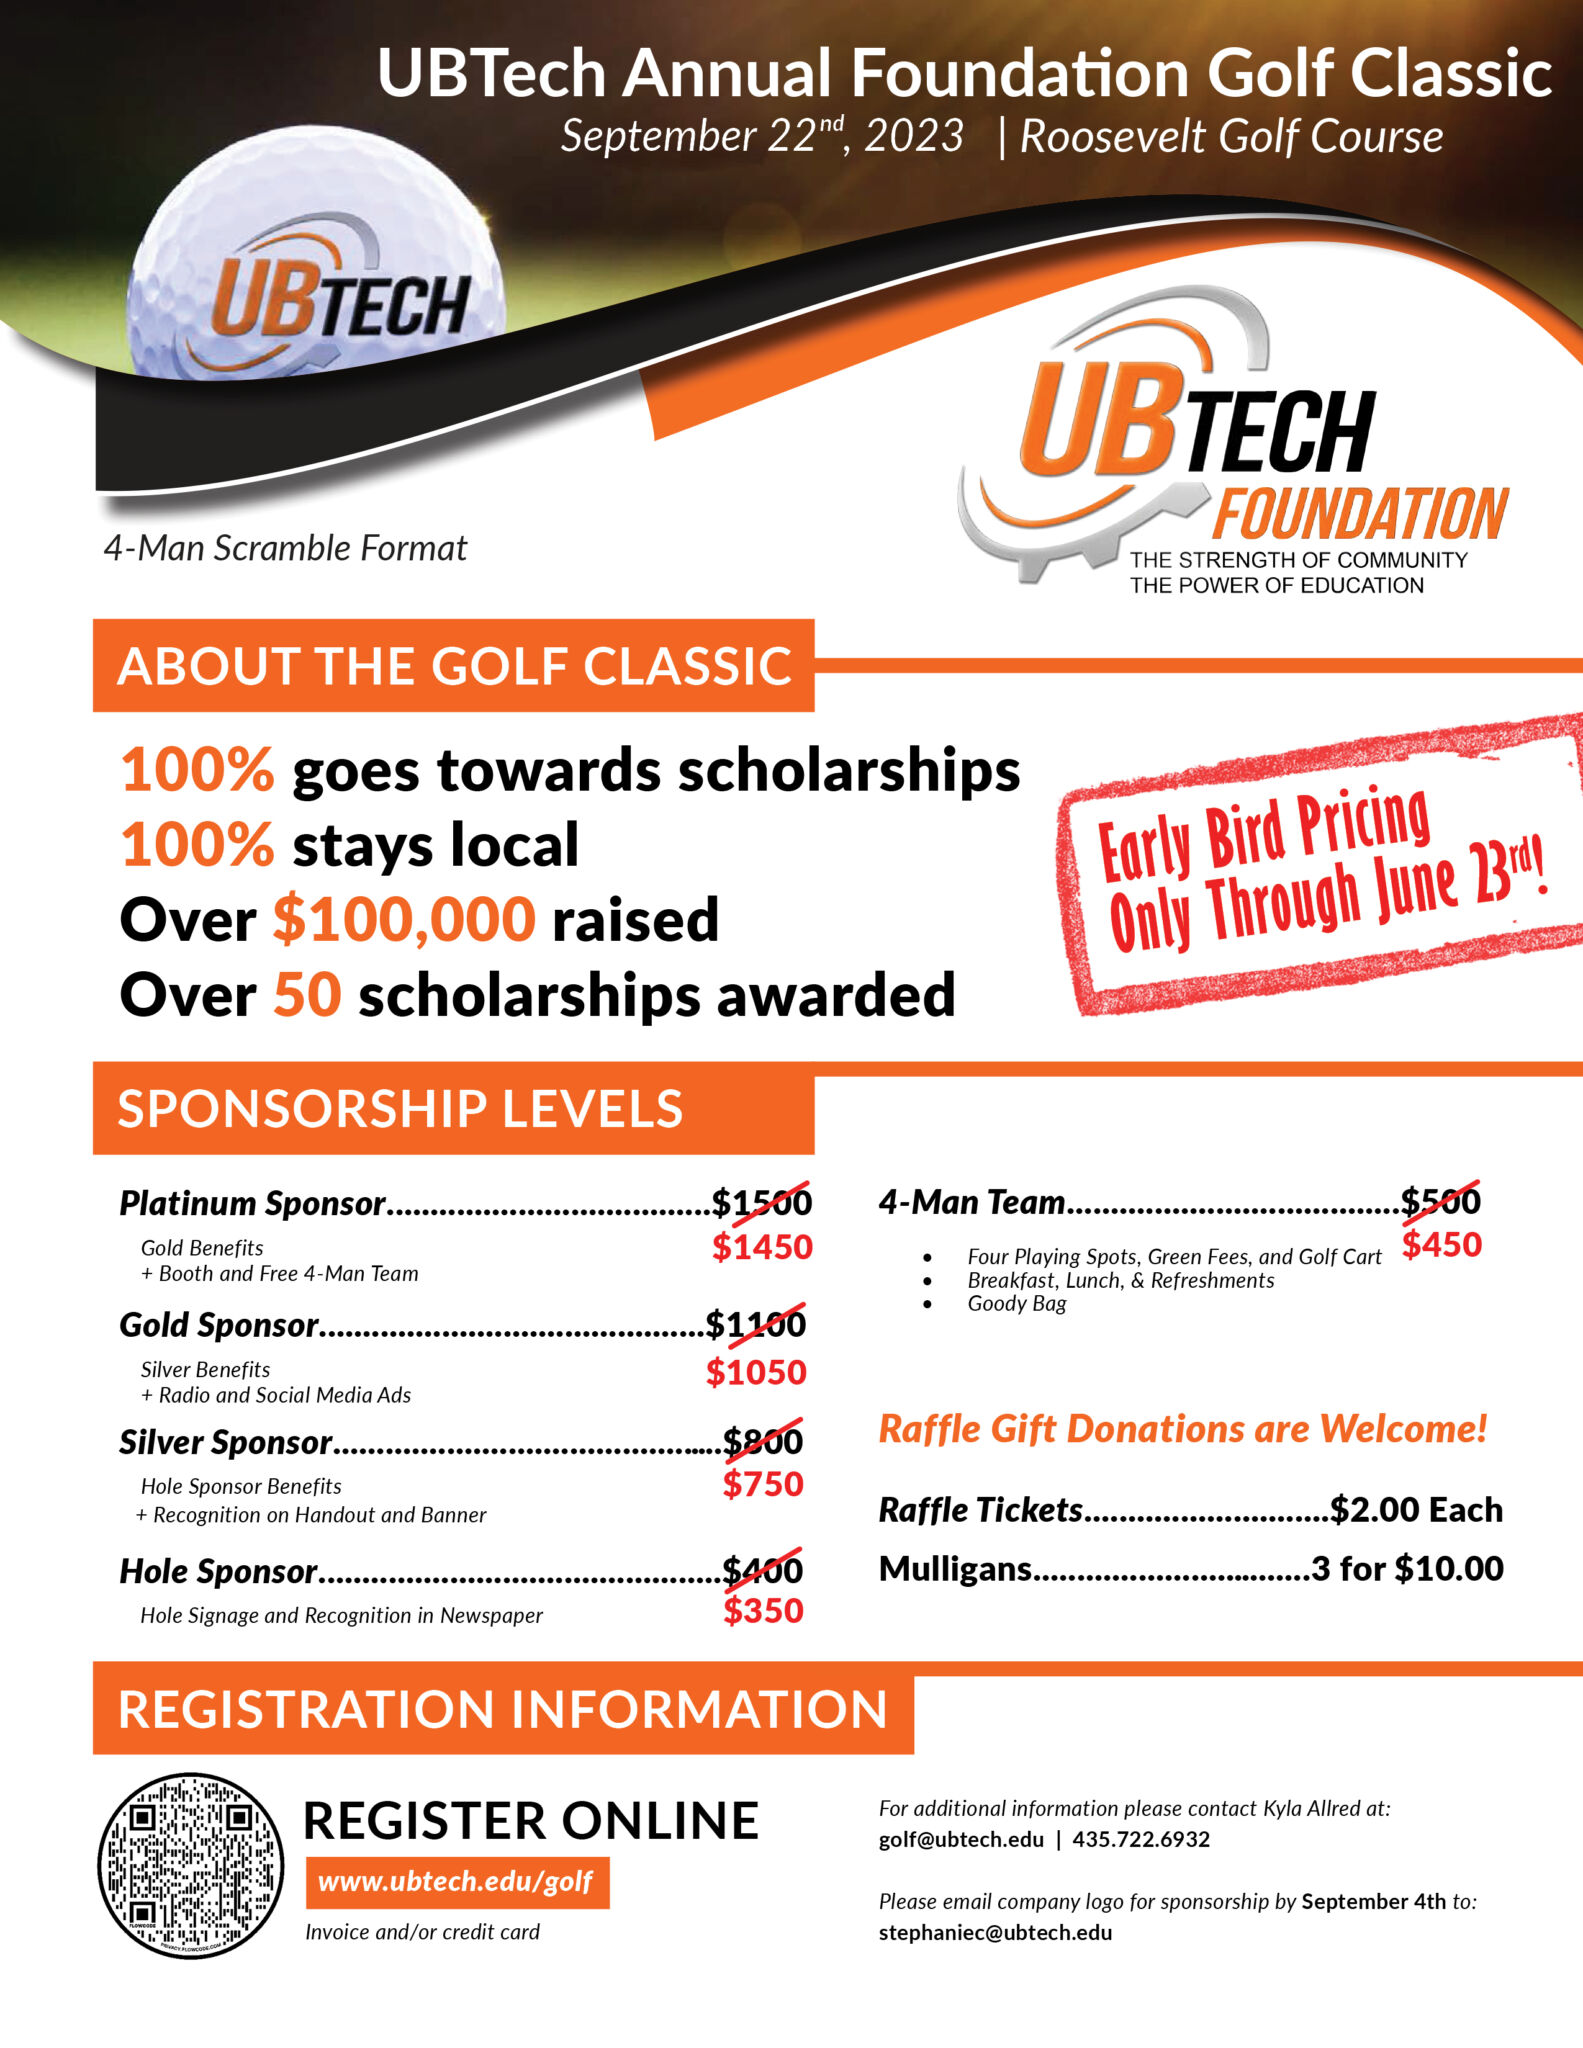 UBTech Annual Foundation Golf Classic. September 23rd 2023. 4-man scramble format. 100% goes towards scholarships. 100% stays local. Over $100,000 raised. Over 50 scholarships awarded. Early bird pricing now through June 23rd. Sponsorship levels: Platinum ($1450; includes gold benefits plus a booth and a free 4-man team), Gold ($1050; Silver benefits plus radio and social media ads), Silver ($`750; Hole sponsor benefits, recognition on handout and banner), Hole Sponsor ($350; Hole signage and Recognition in Newspaper), 4-man team ($450; Four playing spots and golf cart, meals and refreshments, Goody bag). Raffle donations welcome! Raffle tickets are $2.00 each and Mulligans are three for $10.00. Register online at www.ubtech.edu/golf